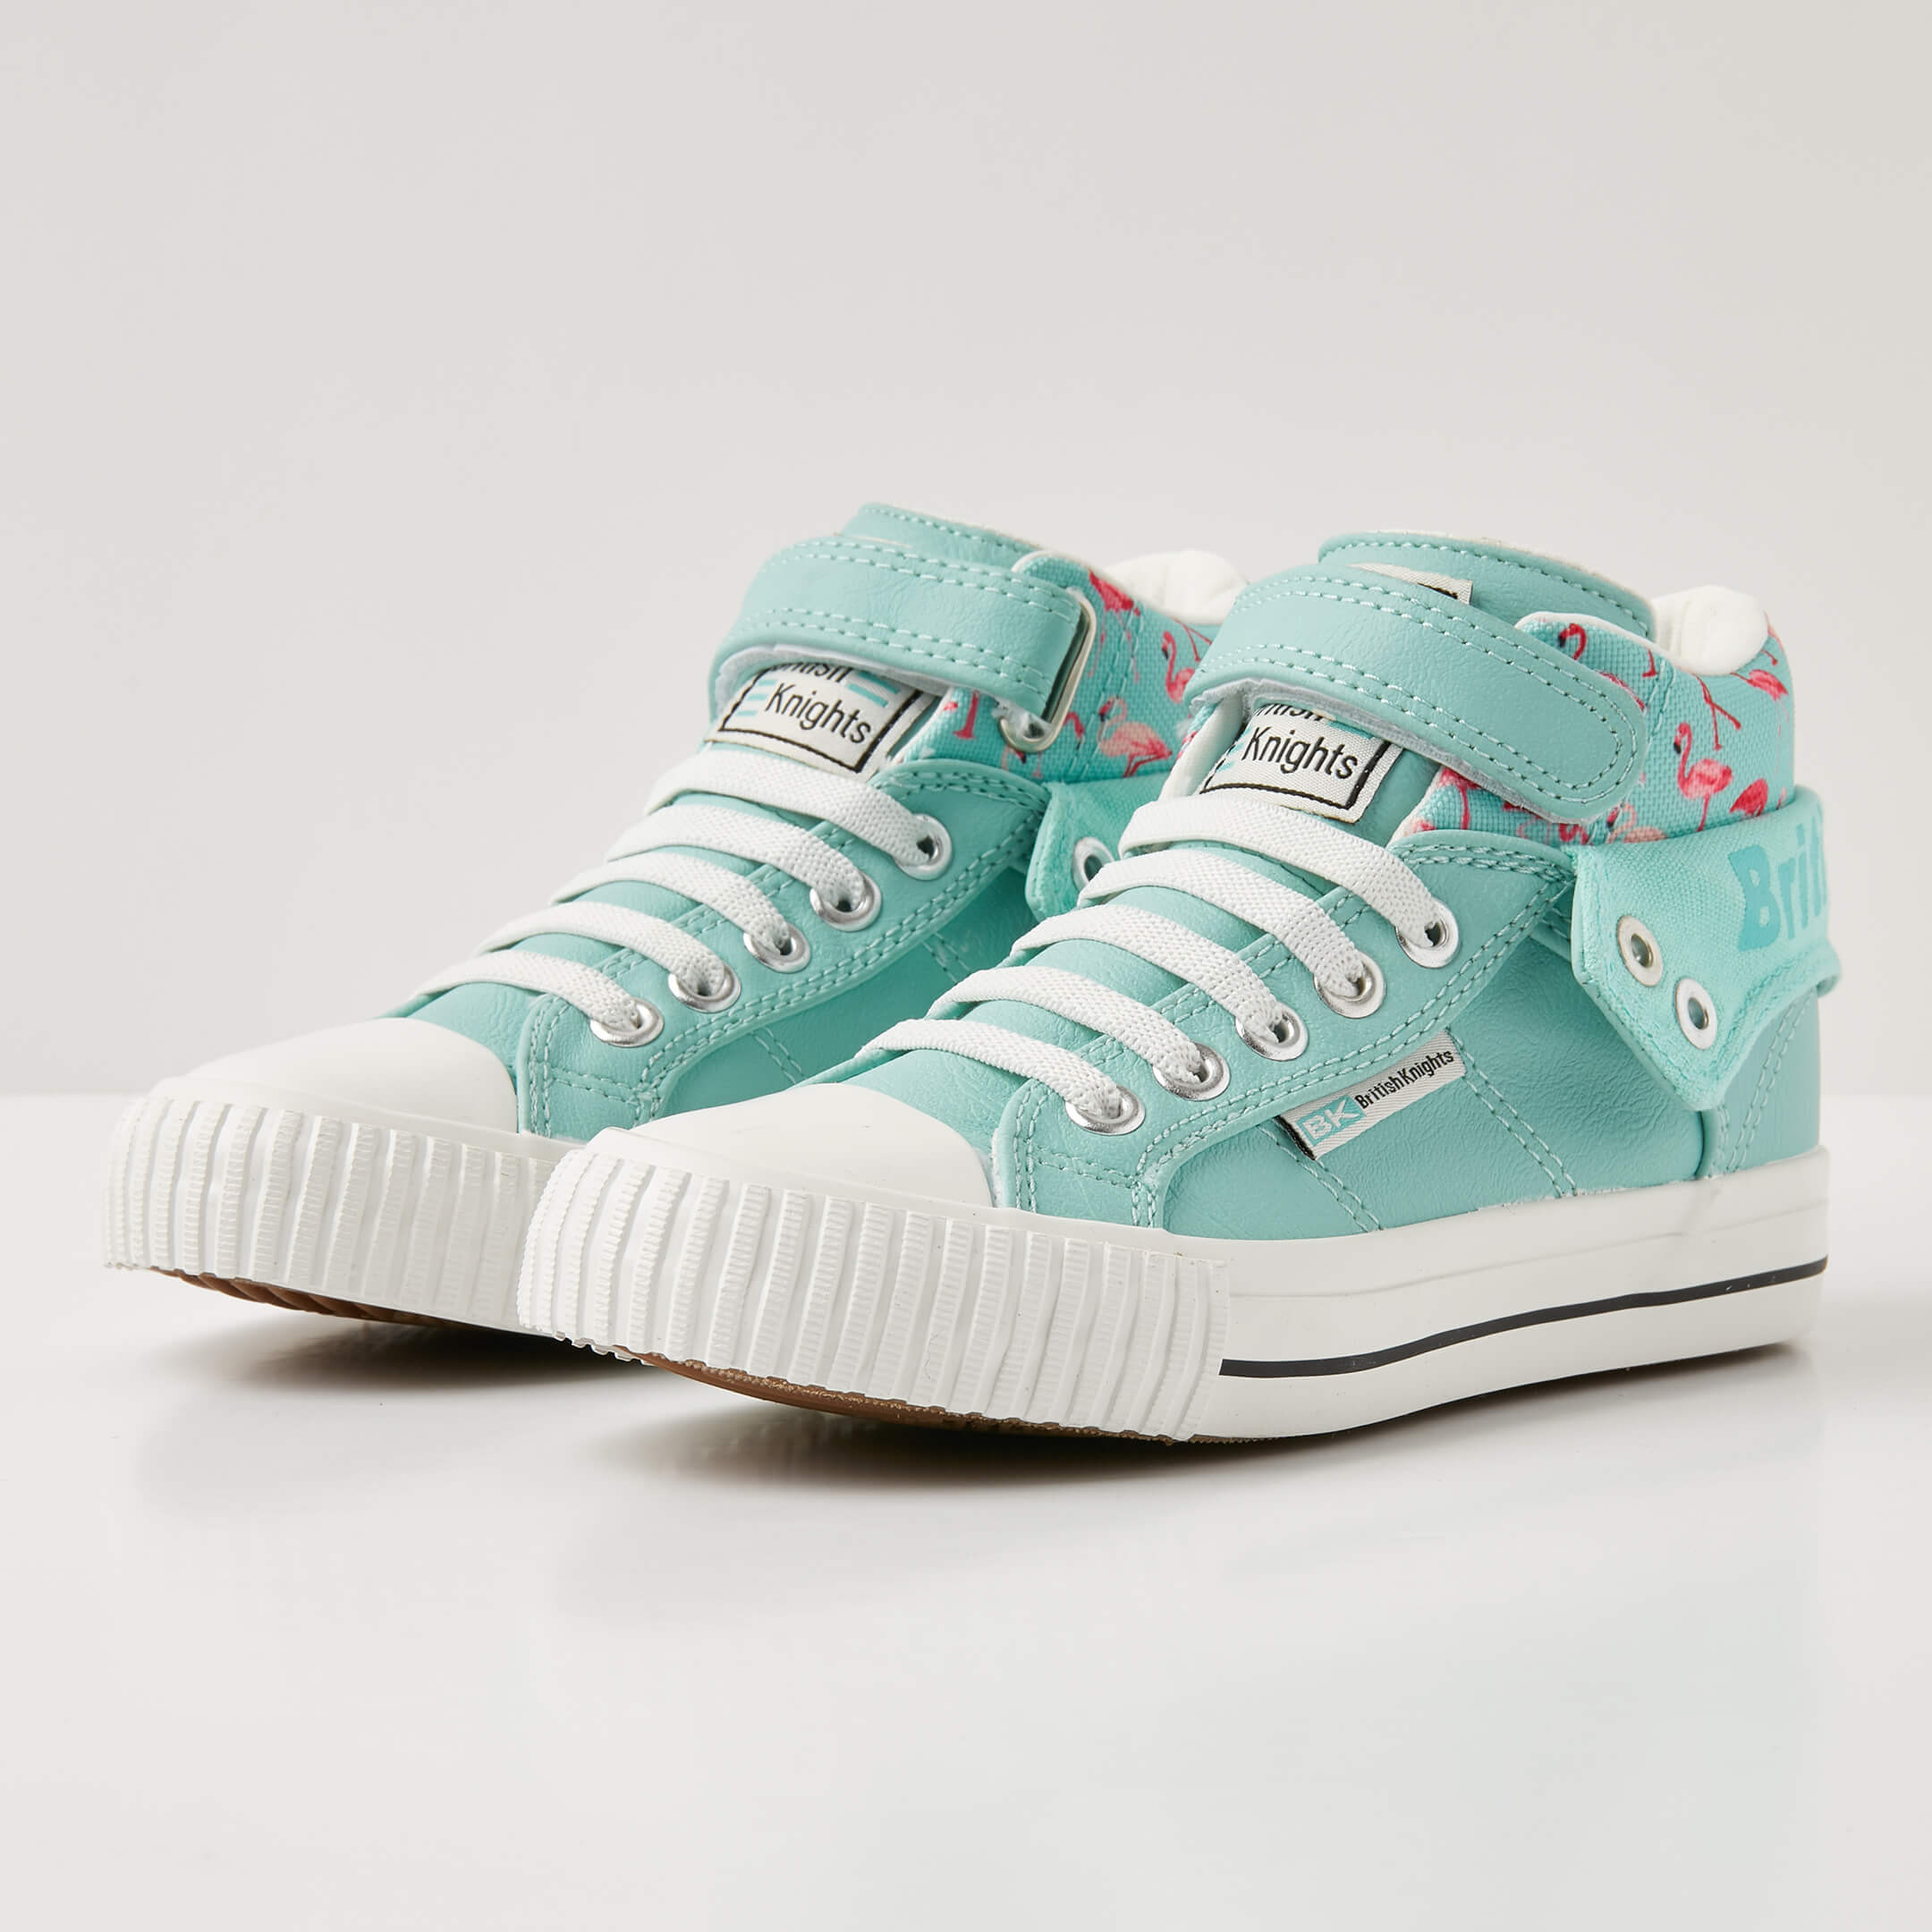 British Knights Sneaker Front view  B43-3704C-02 ROCO HIGH-TOP FEMALE